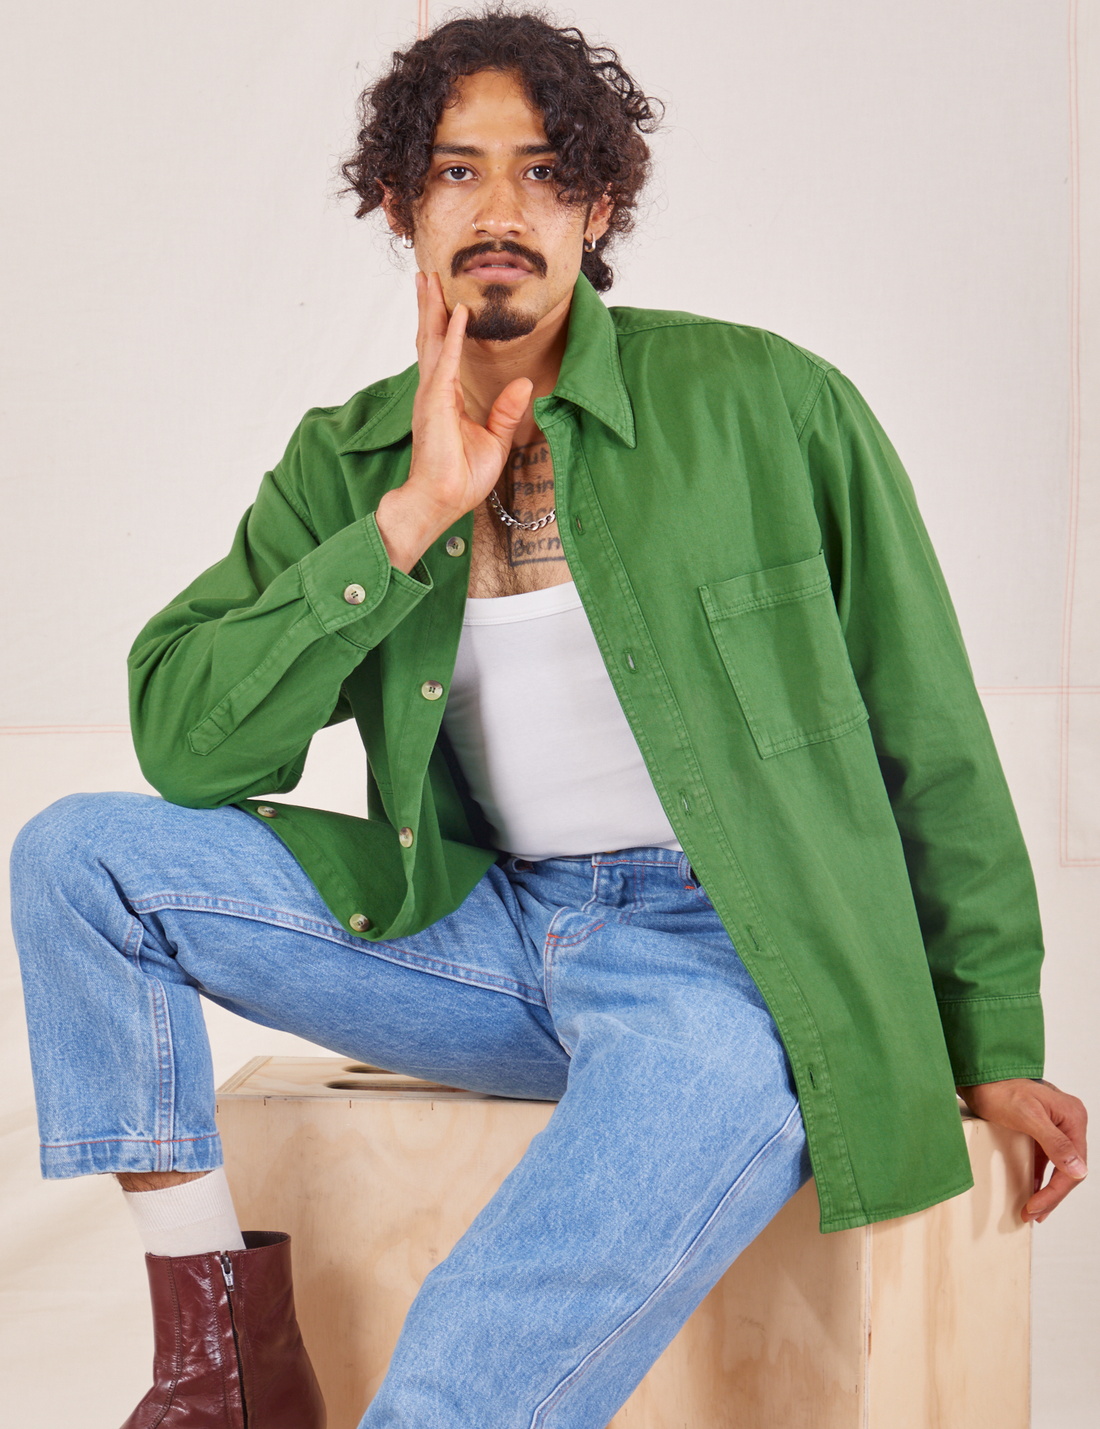 Jesse is wearing size S Oversize Overshirt in Lawn Green paired with vintage off-white Tank Top